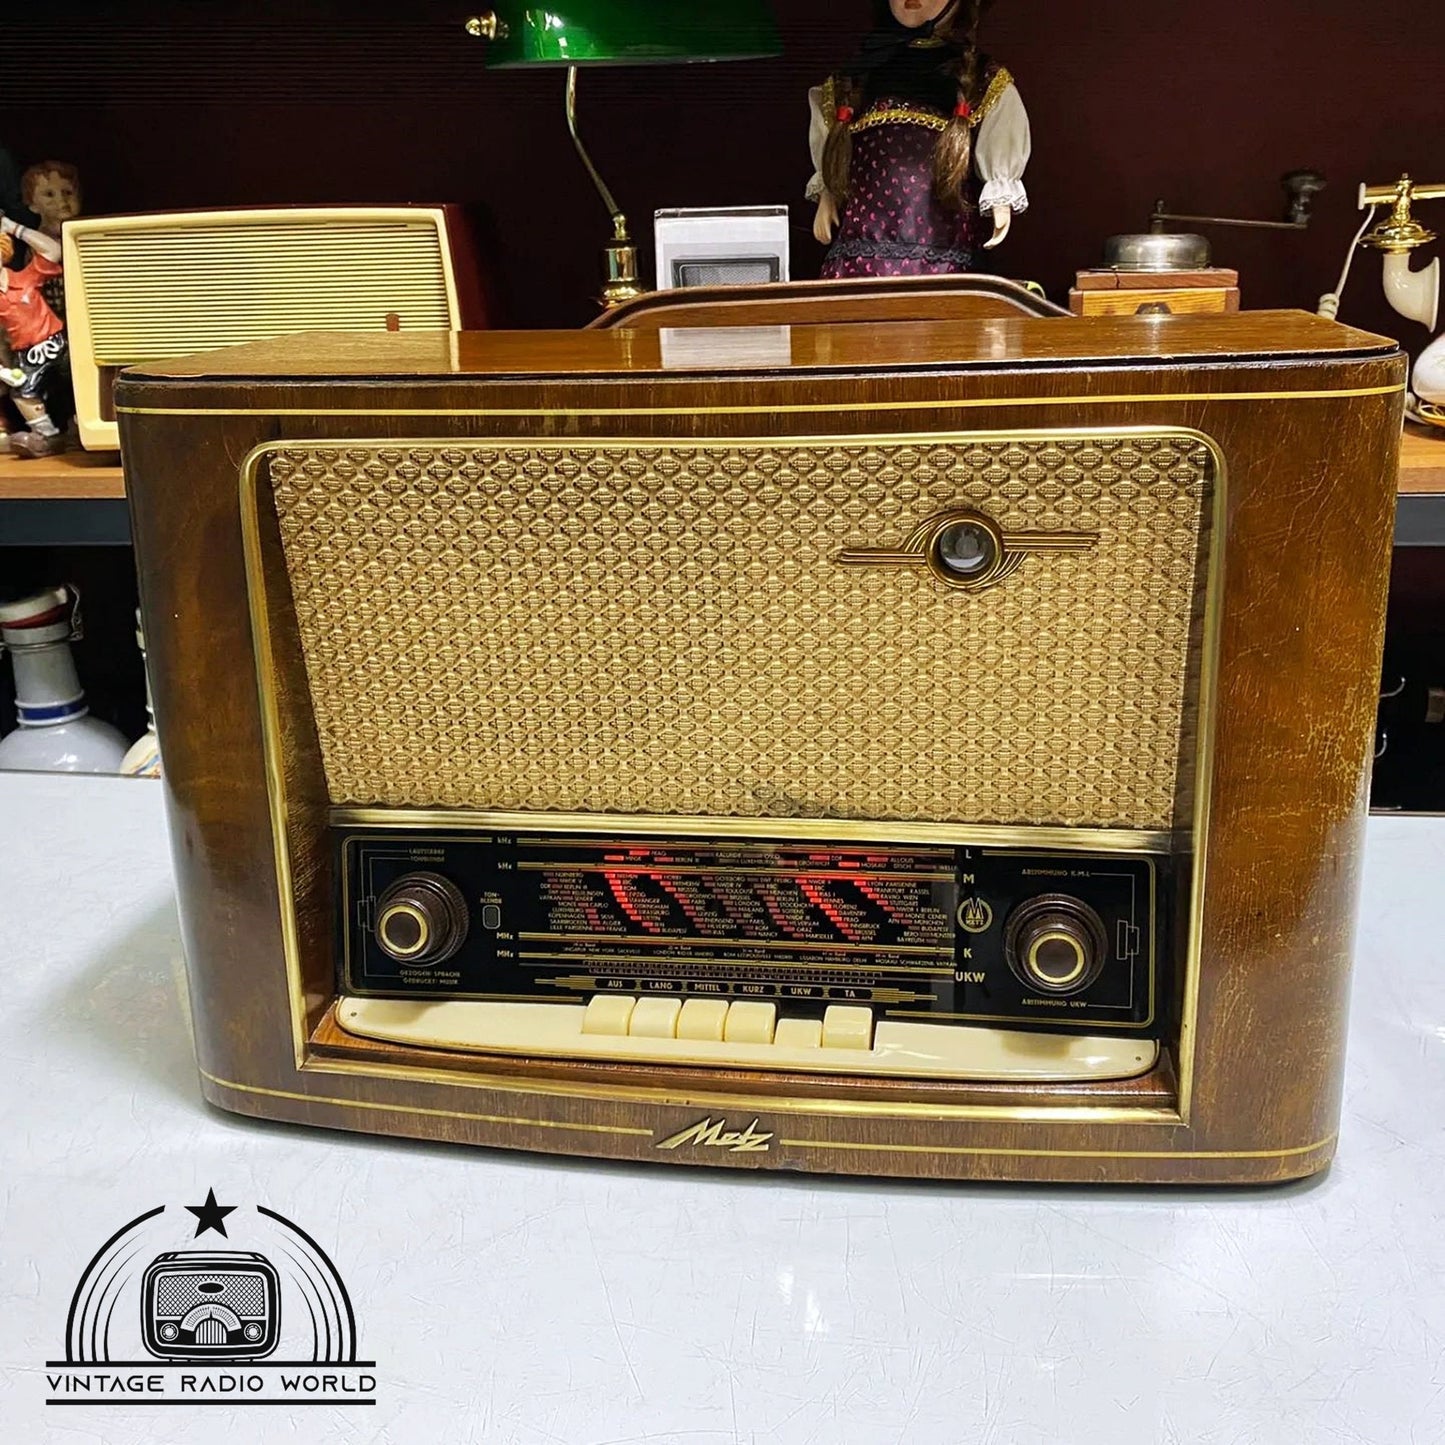 Metz Vintage Radio - Classic Design with Timeless Appeal and Lamp Feature